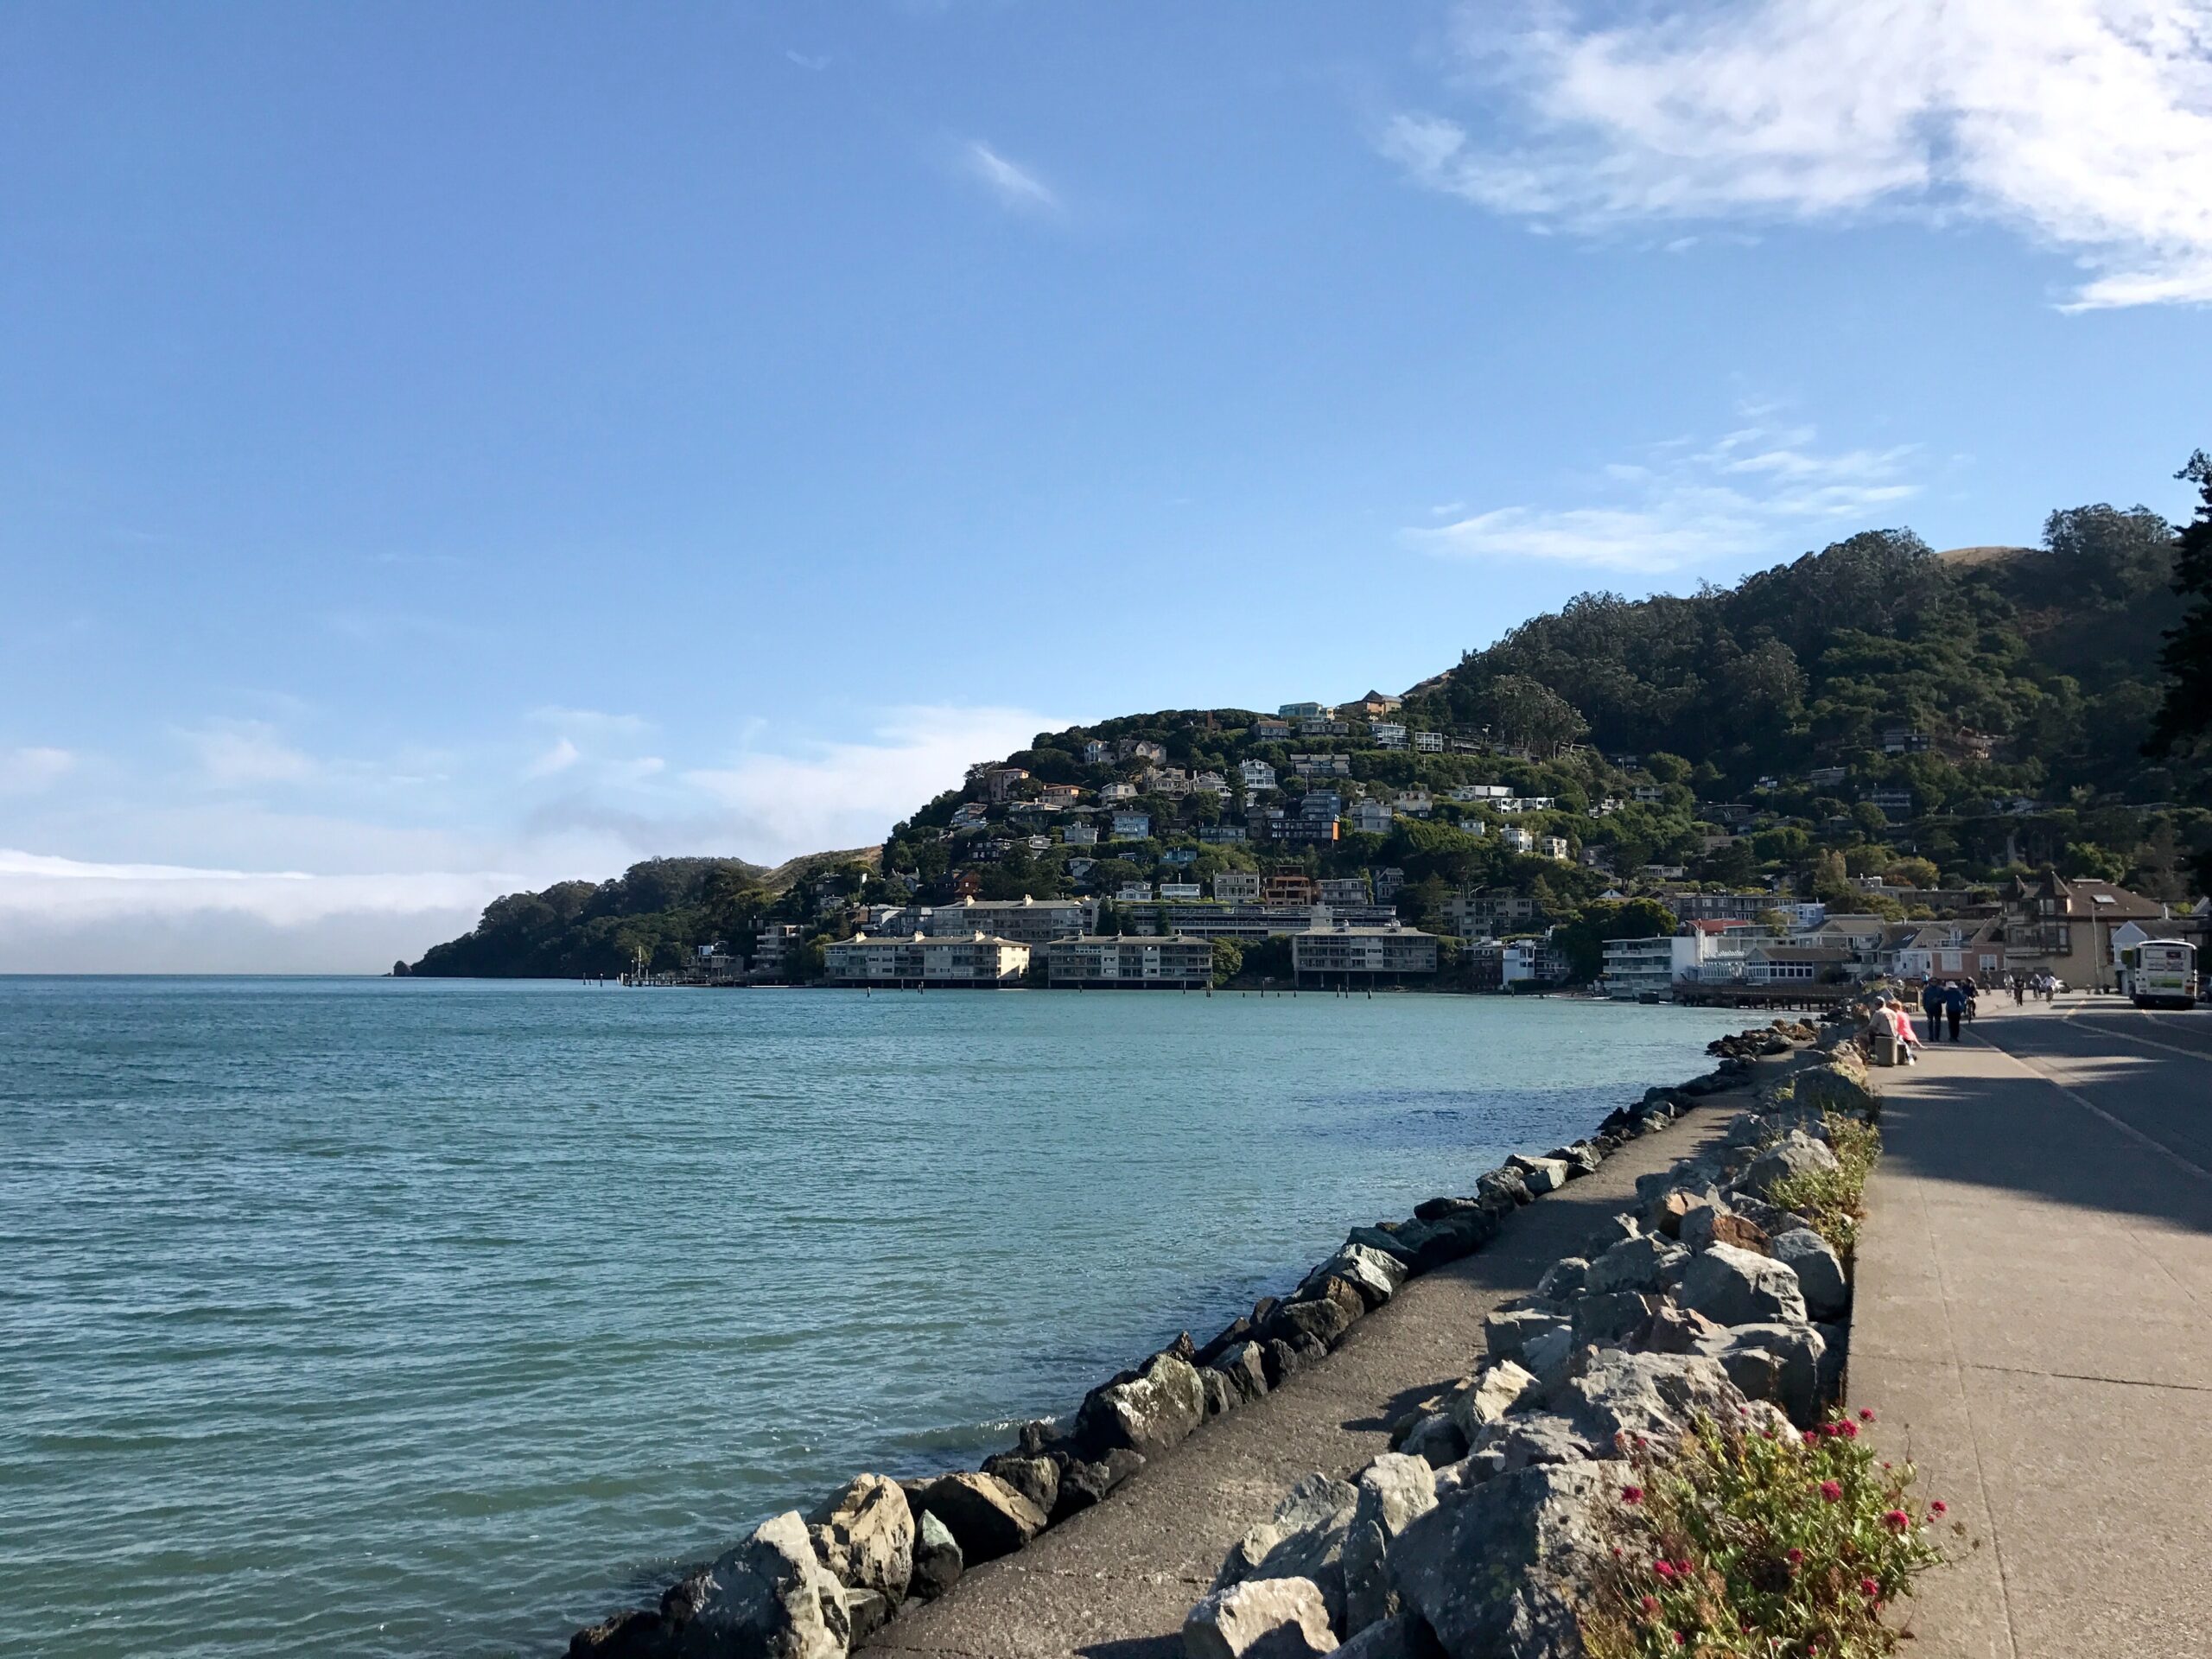 View of Sausalito's waterfront